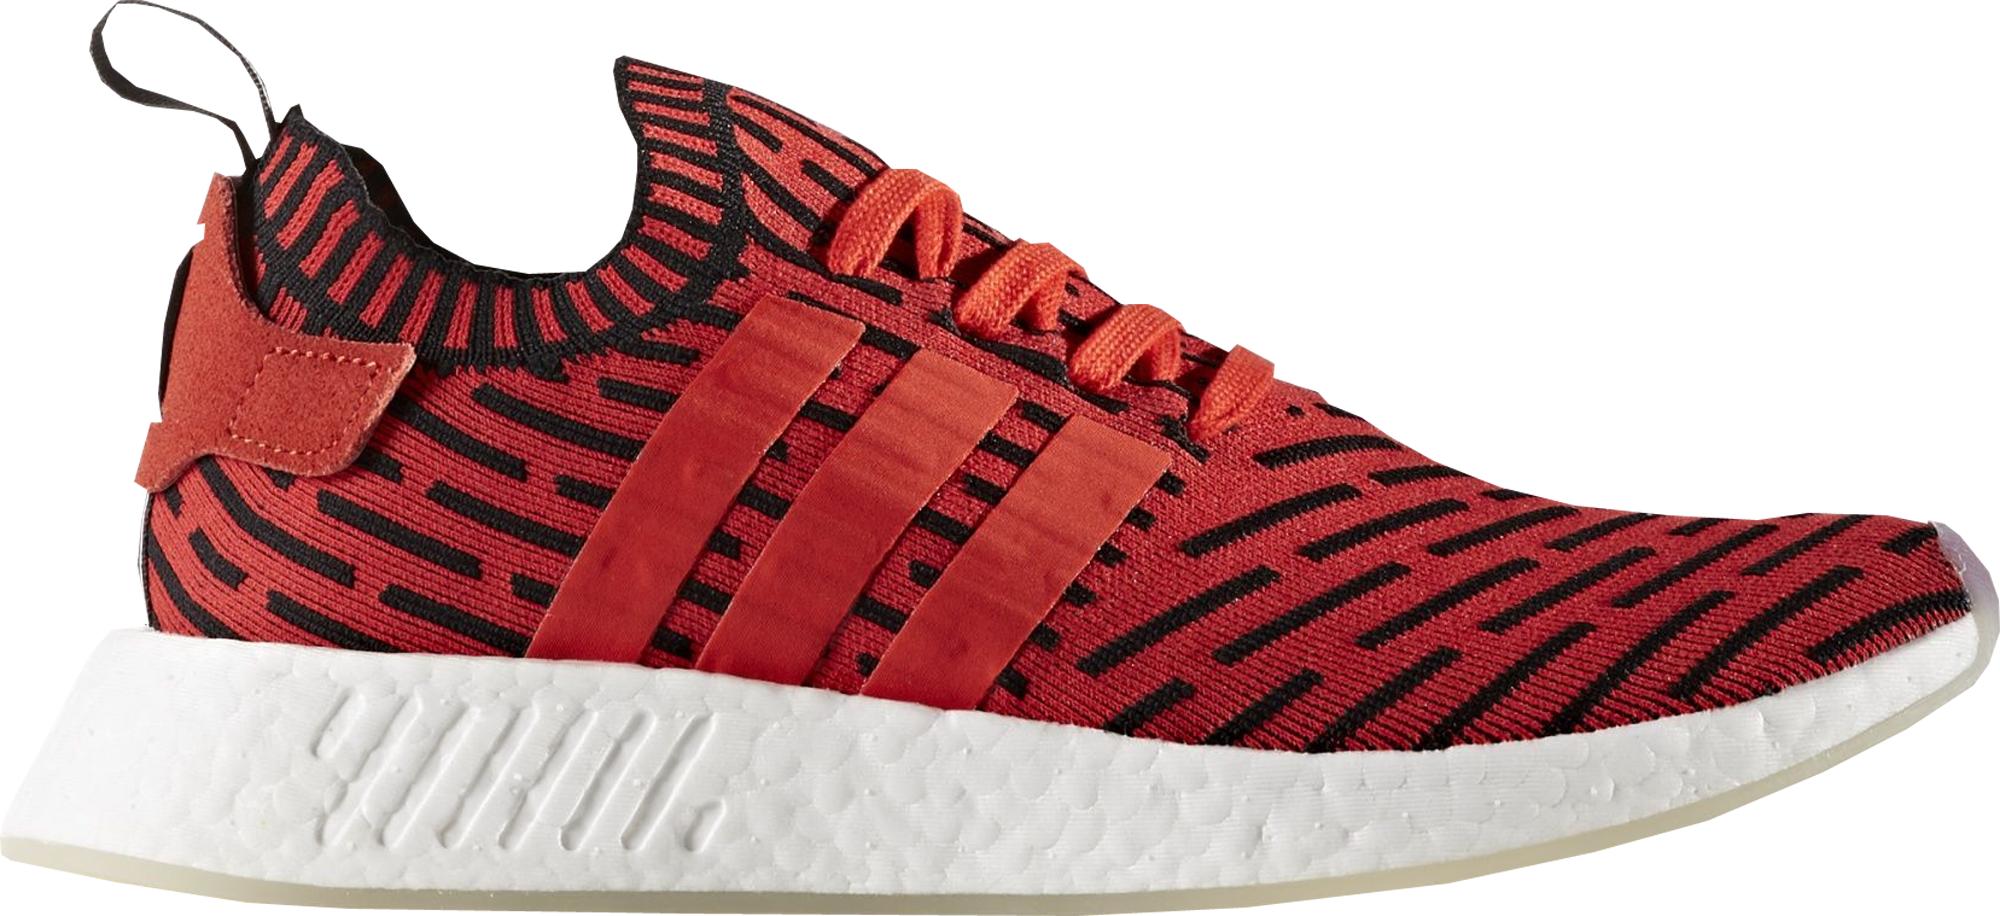 adidas NMD R2 Core Red Primeknit Two-Tone